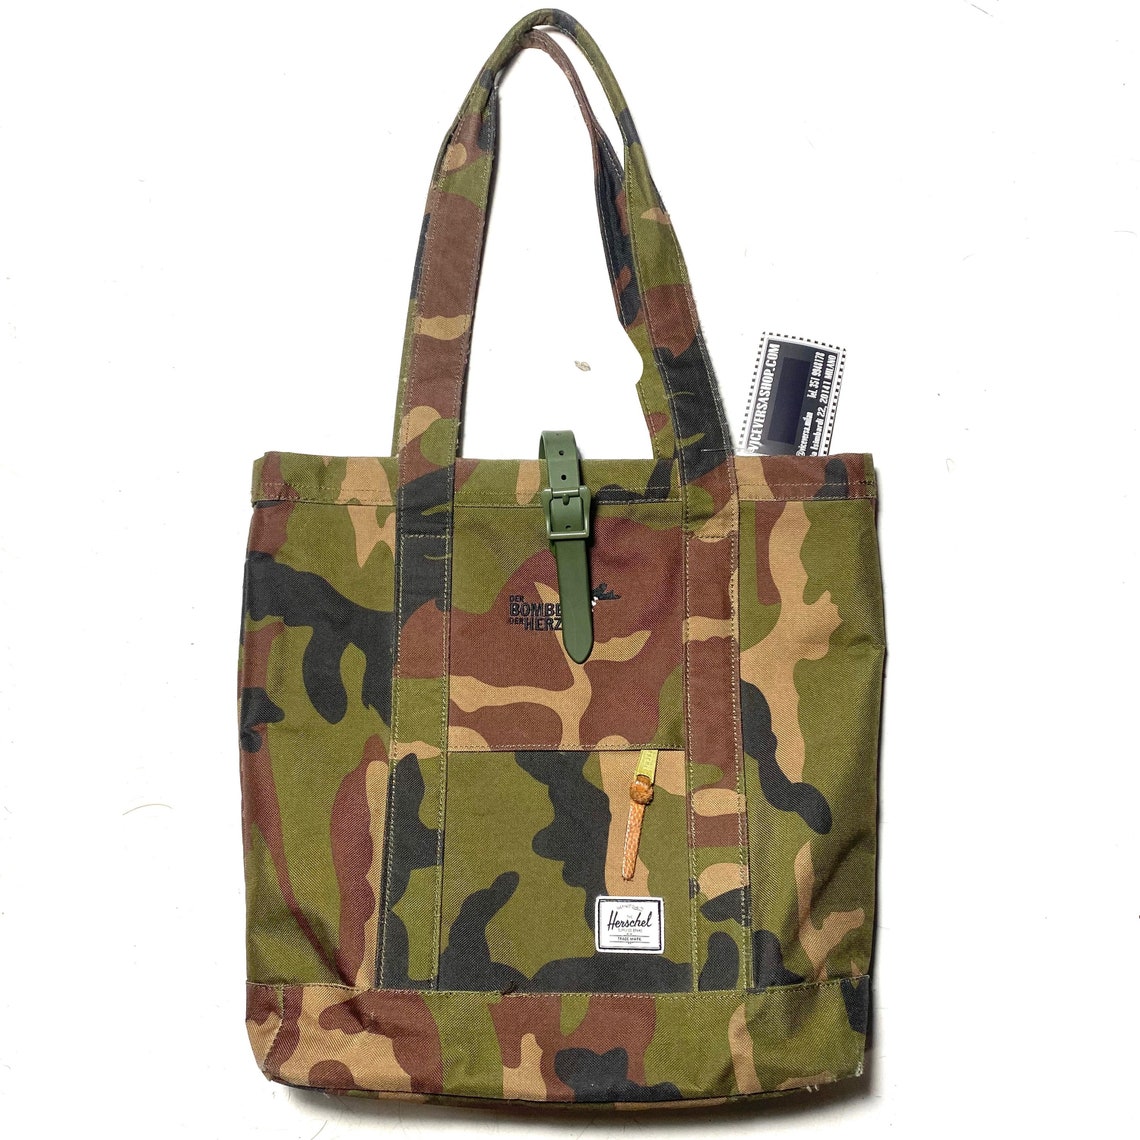 Herschel bomber military camo tote / shoulder all day unisex | Etsy